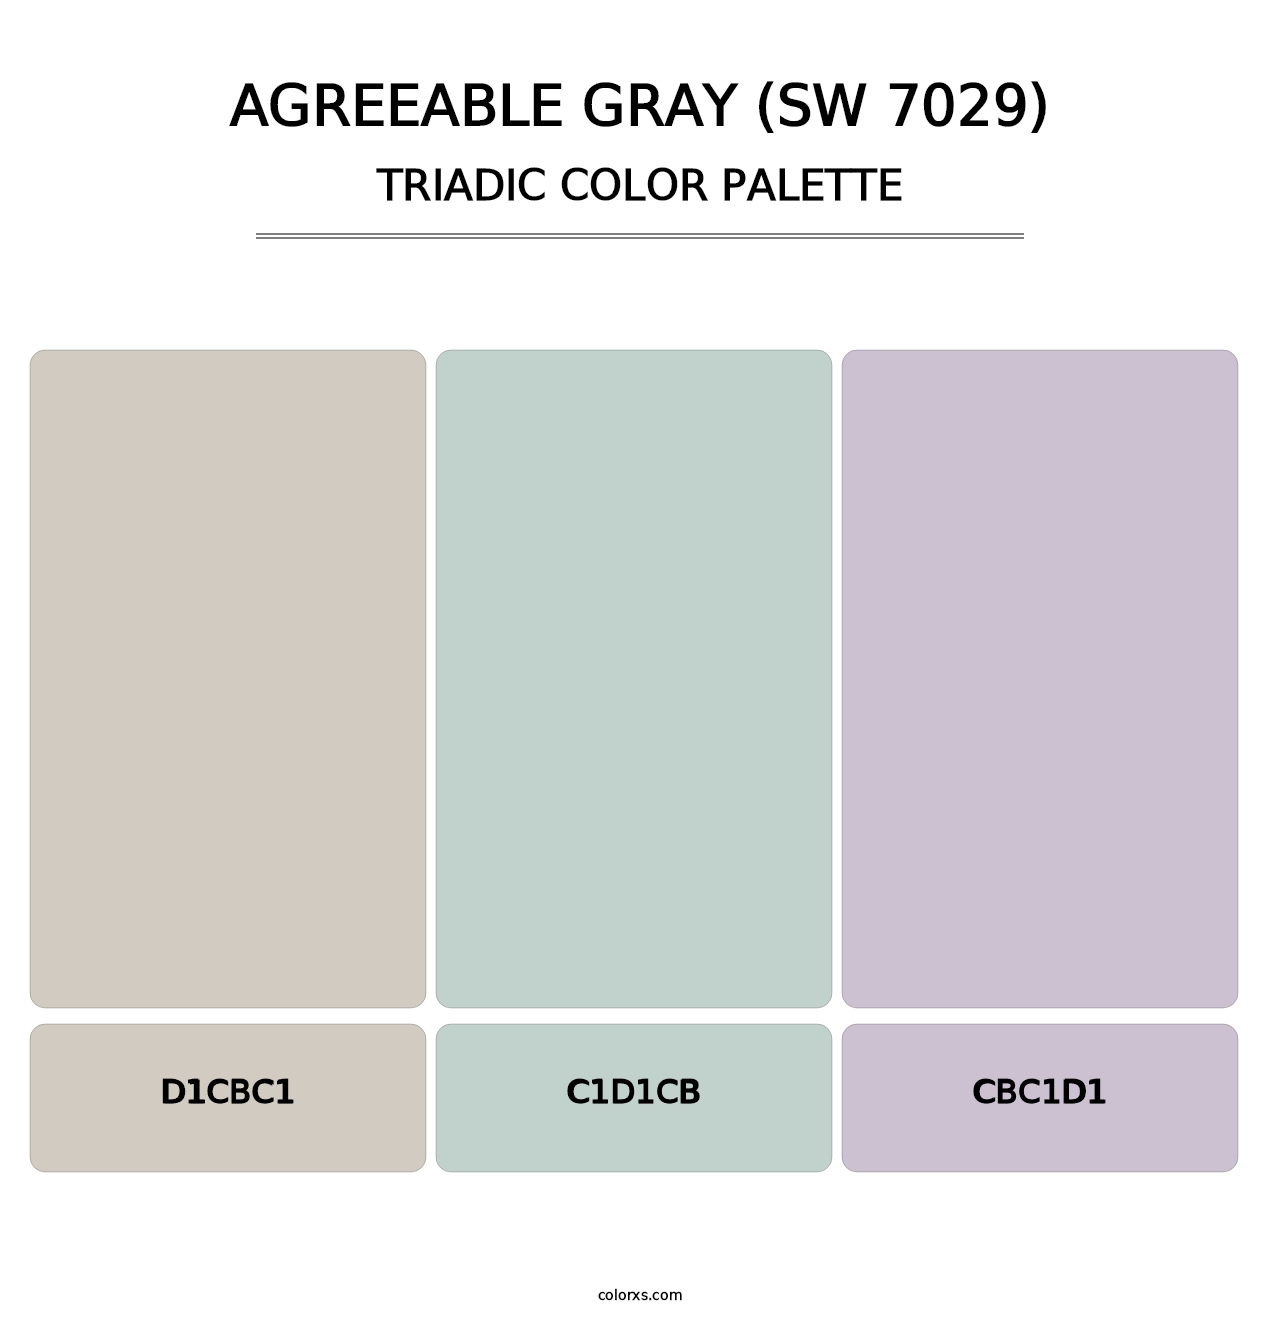 Agreeable Gray (SW 7029) - Triadic Color Palette